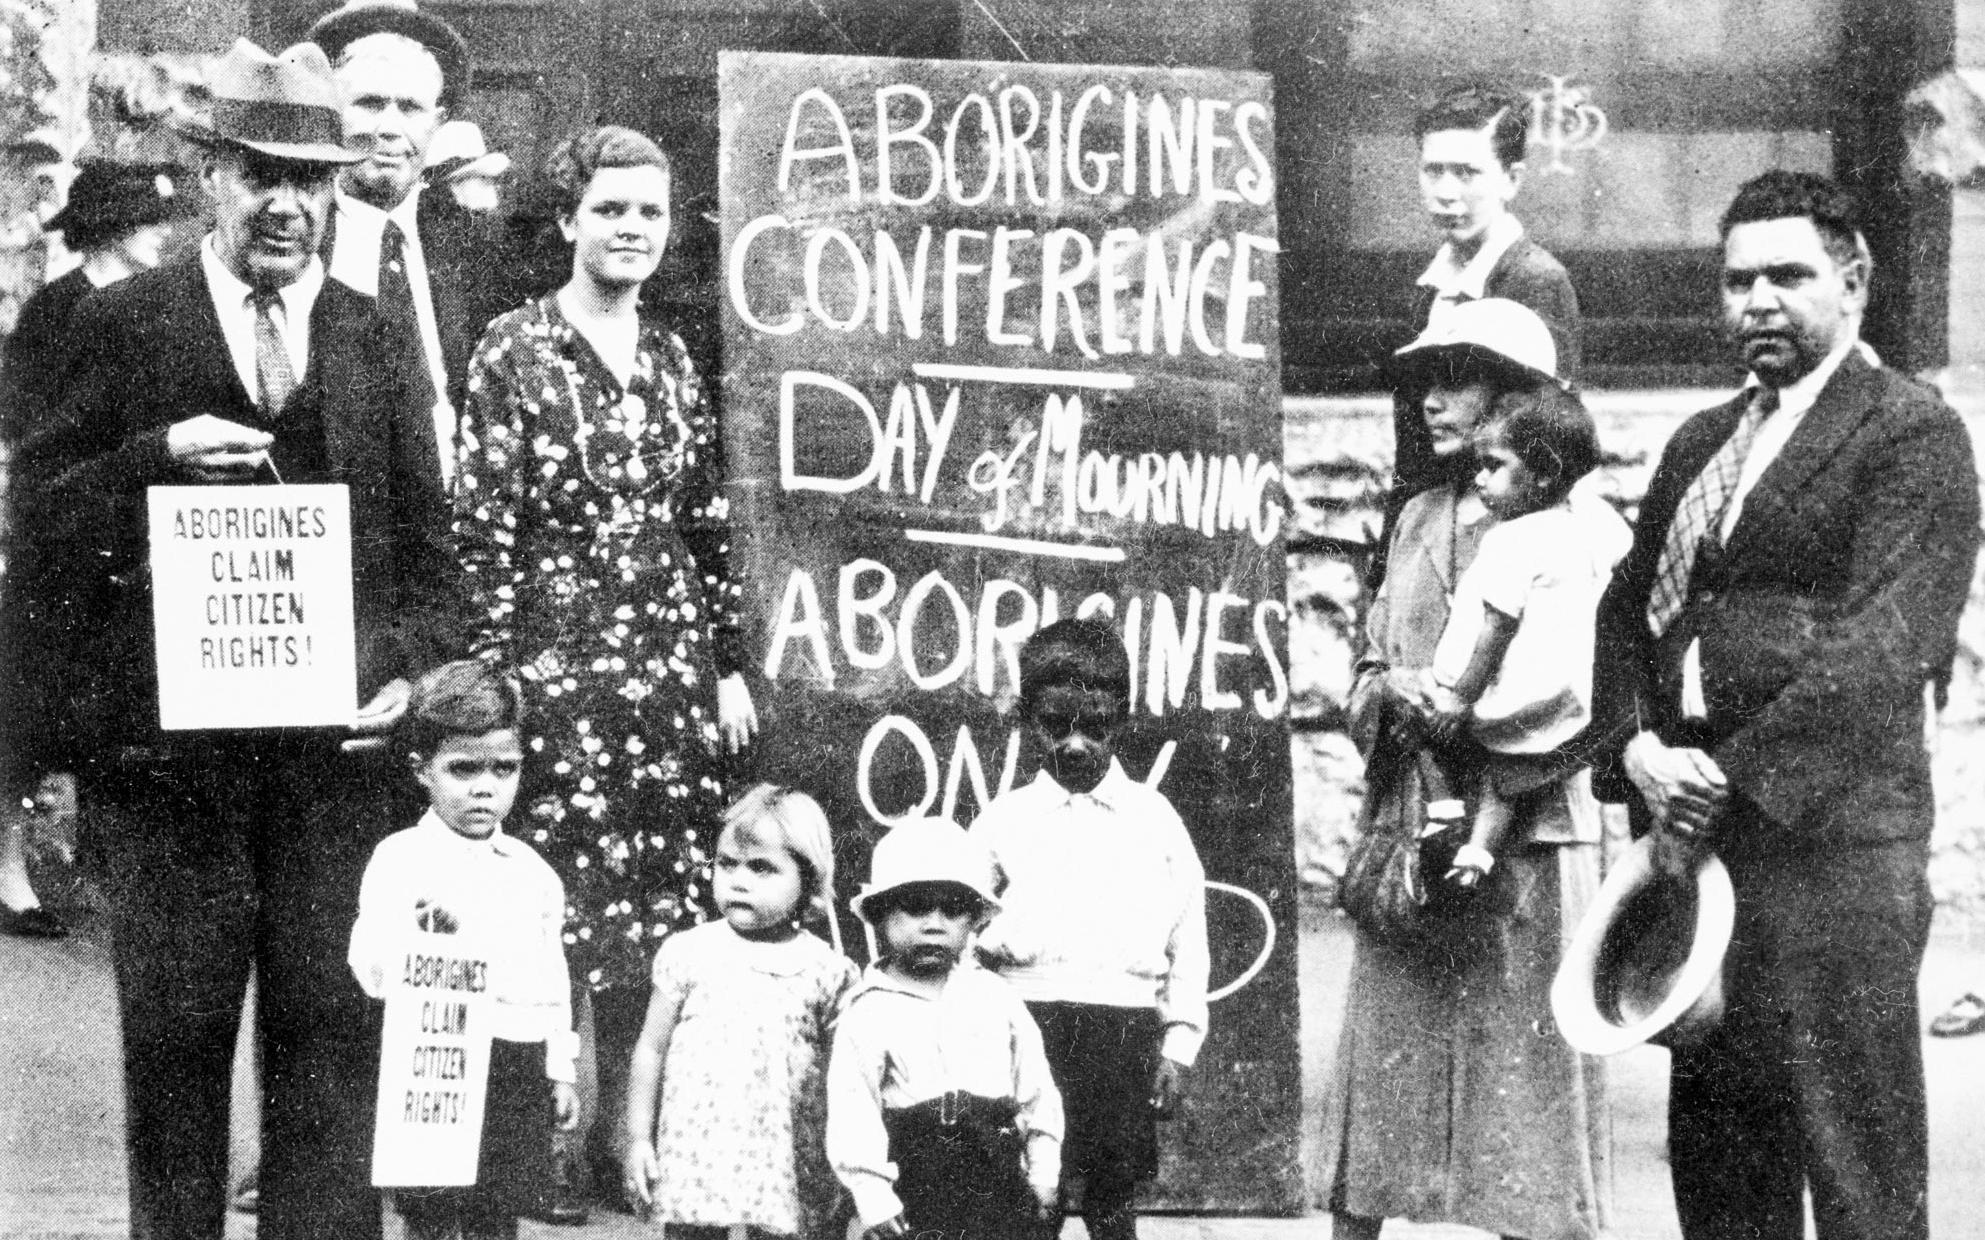 Aboriginal Day of Mourning, 26 January 1938.